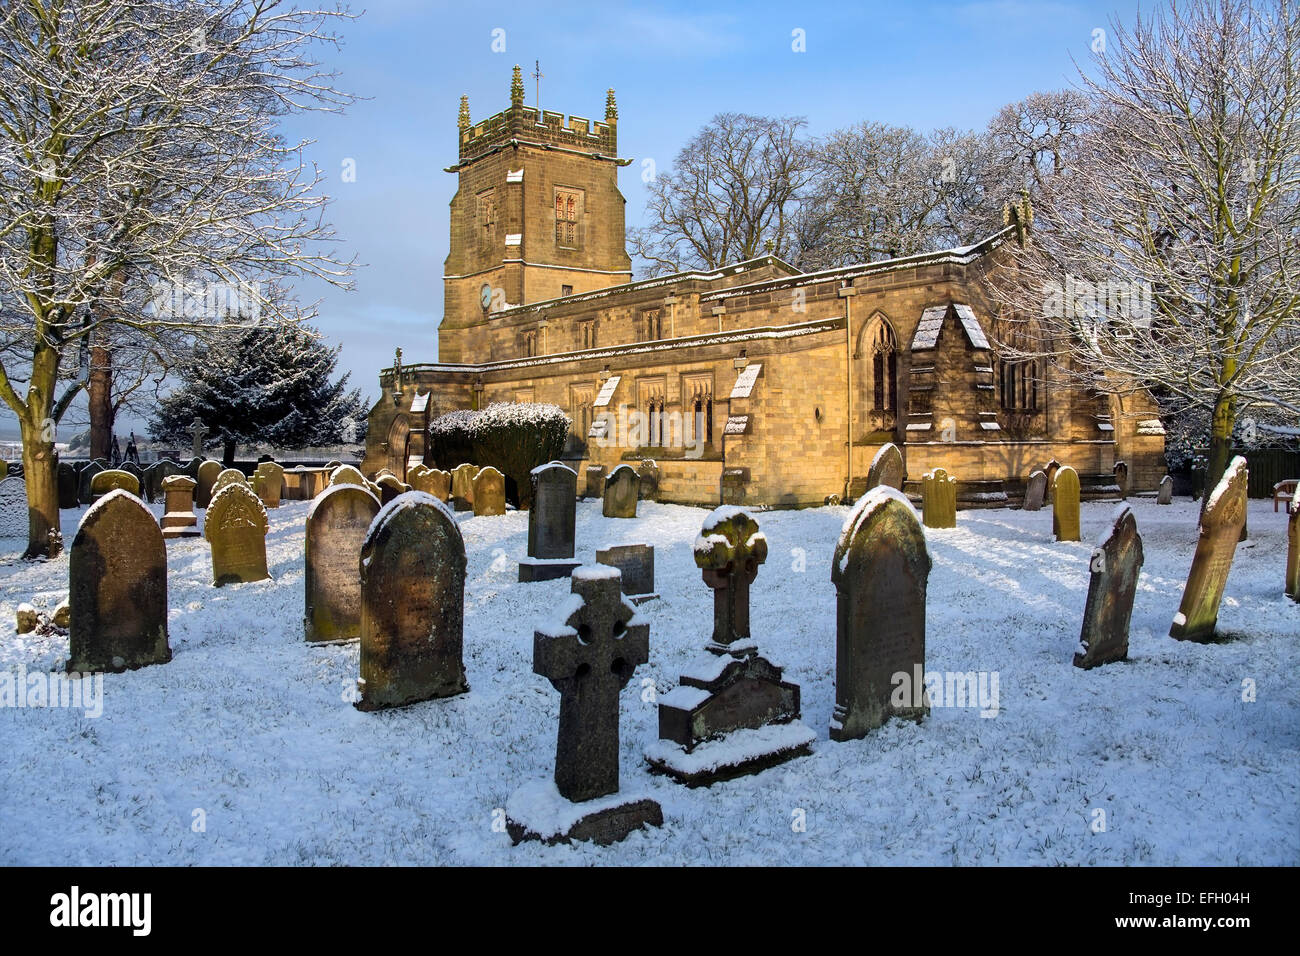 Winter snow in the graveyard of an English Parish Church in the small village of Slingsby in North Yorkshire in northern England Stock Photo